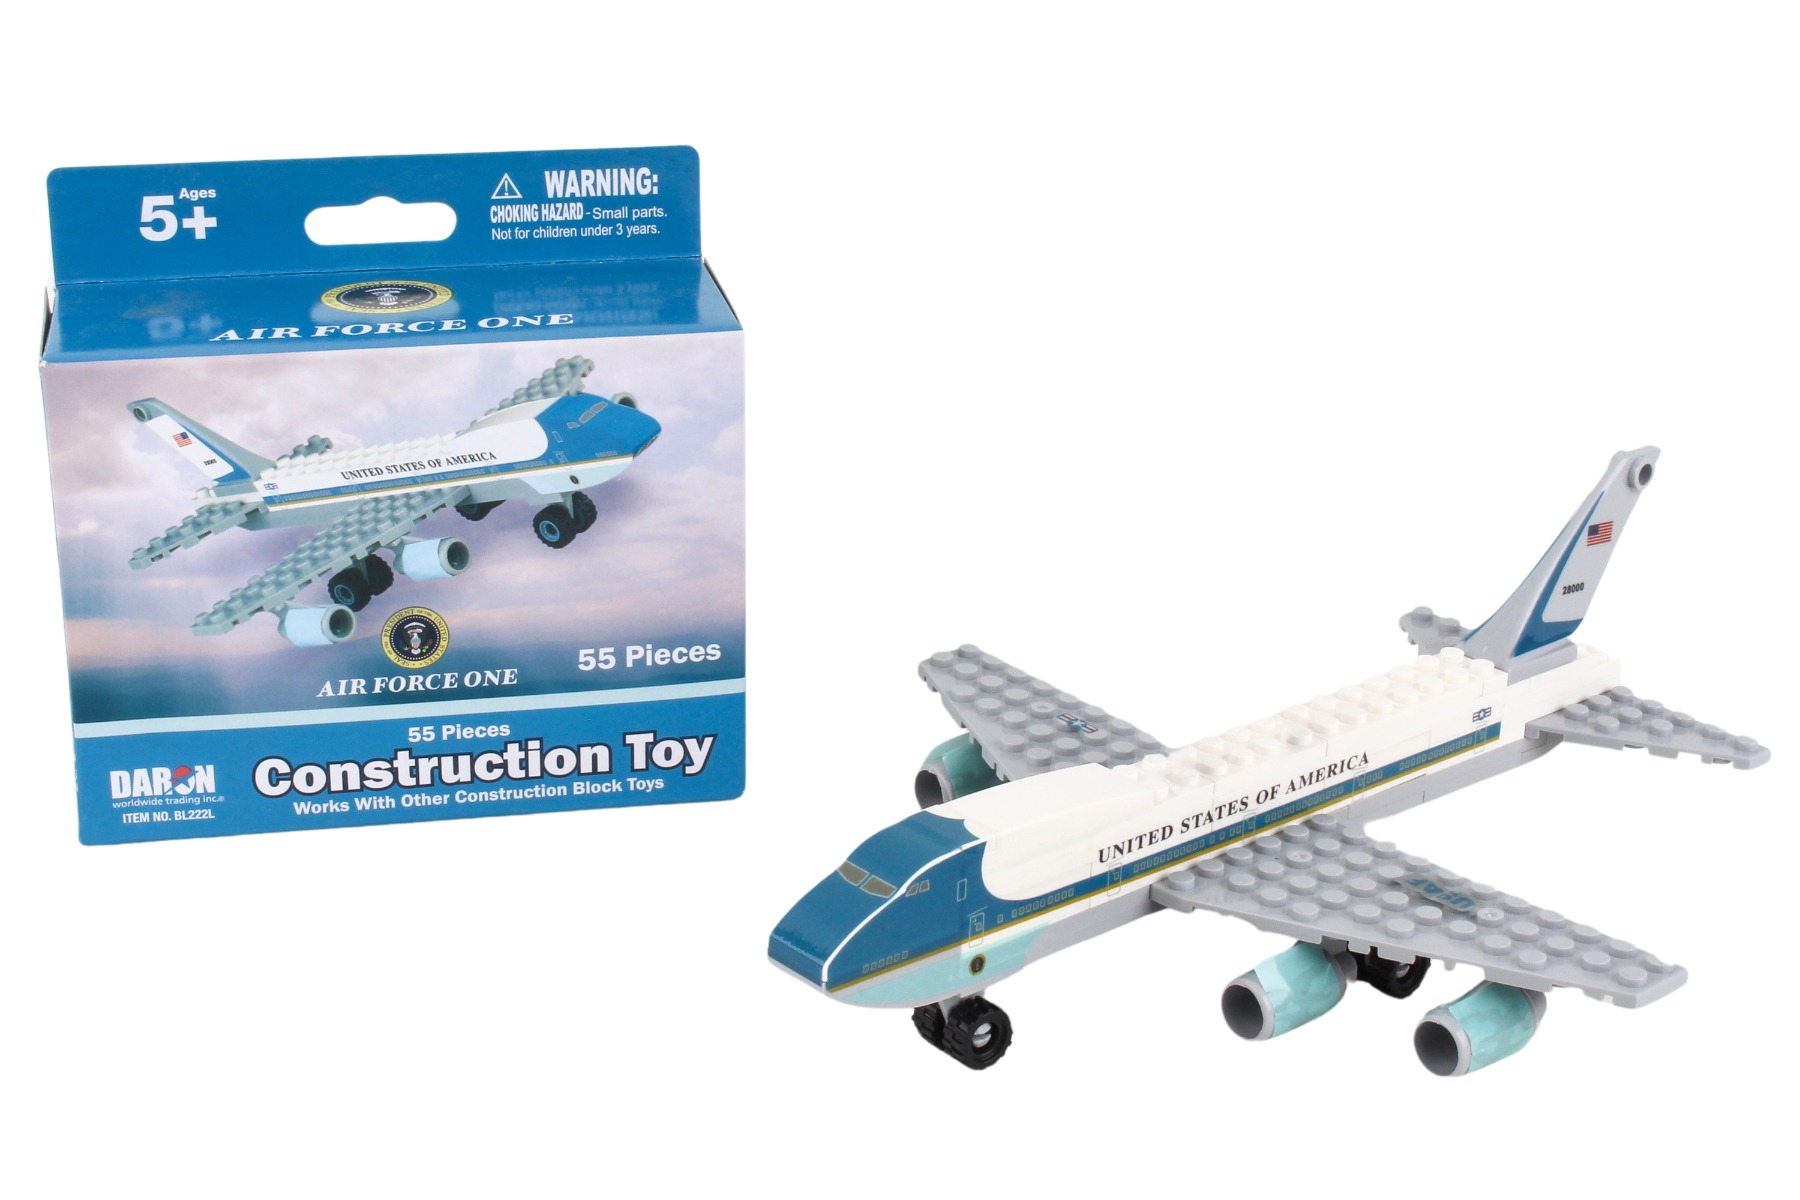 BL222 - "air Force One Construction Toy"